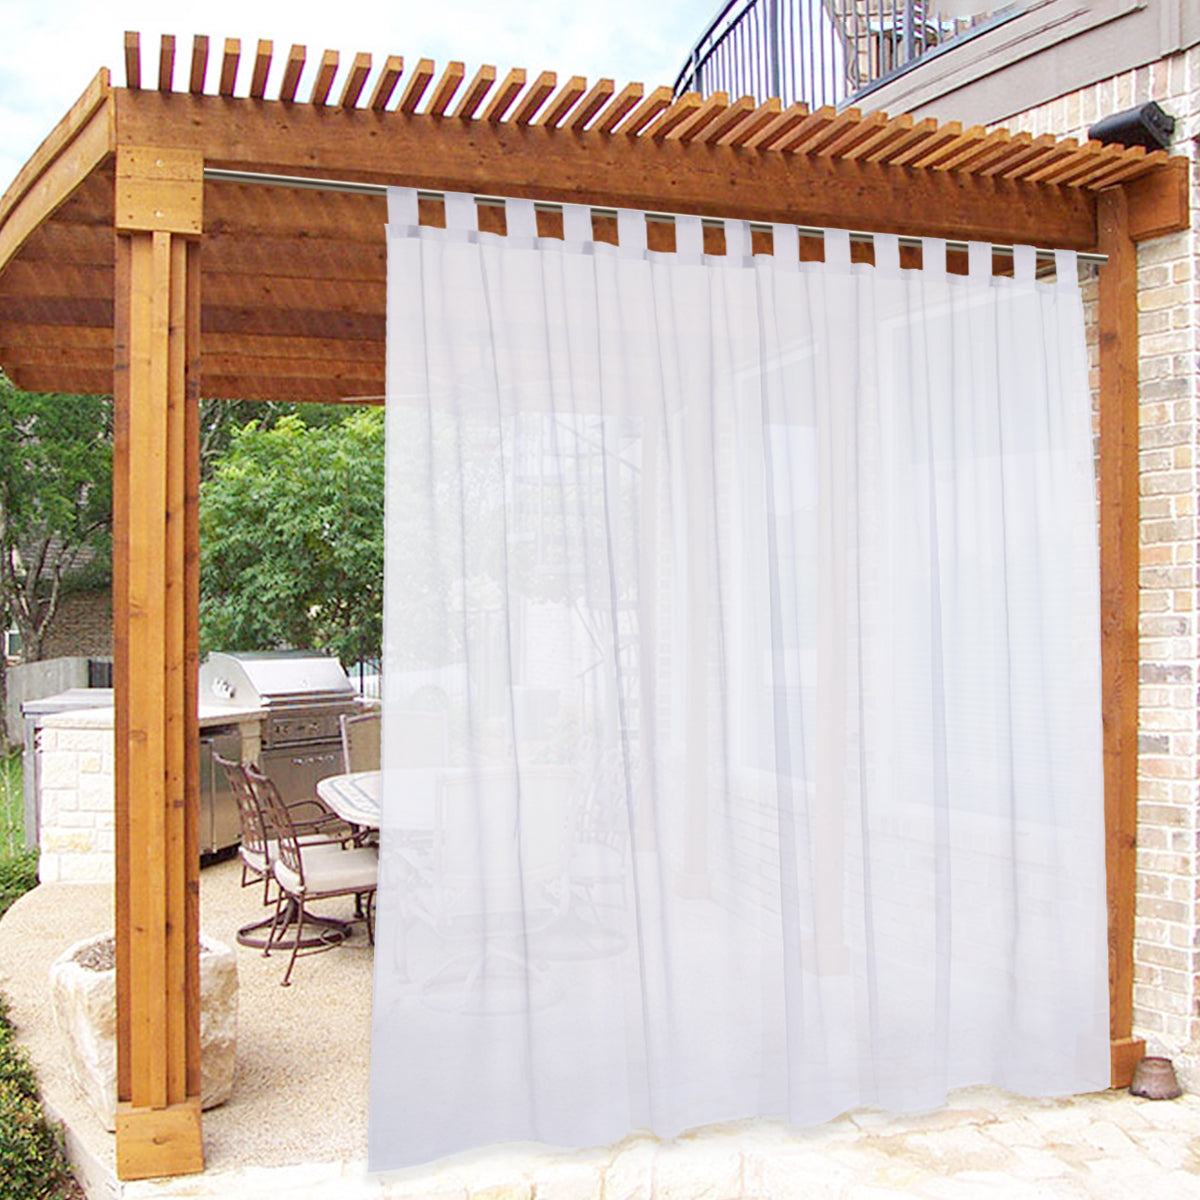 White Velcro Tab Top Waterproof Privacy Decorative Outdoor Sheer Curtains 1 Panel KGORGE Store